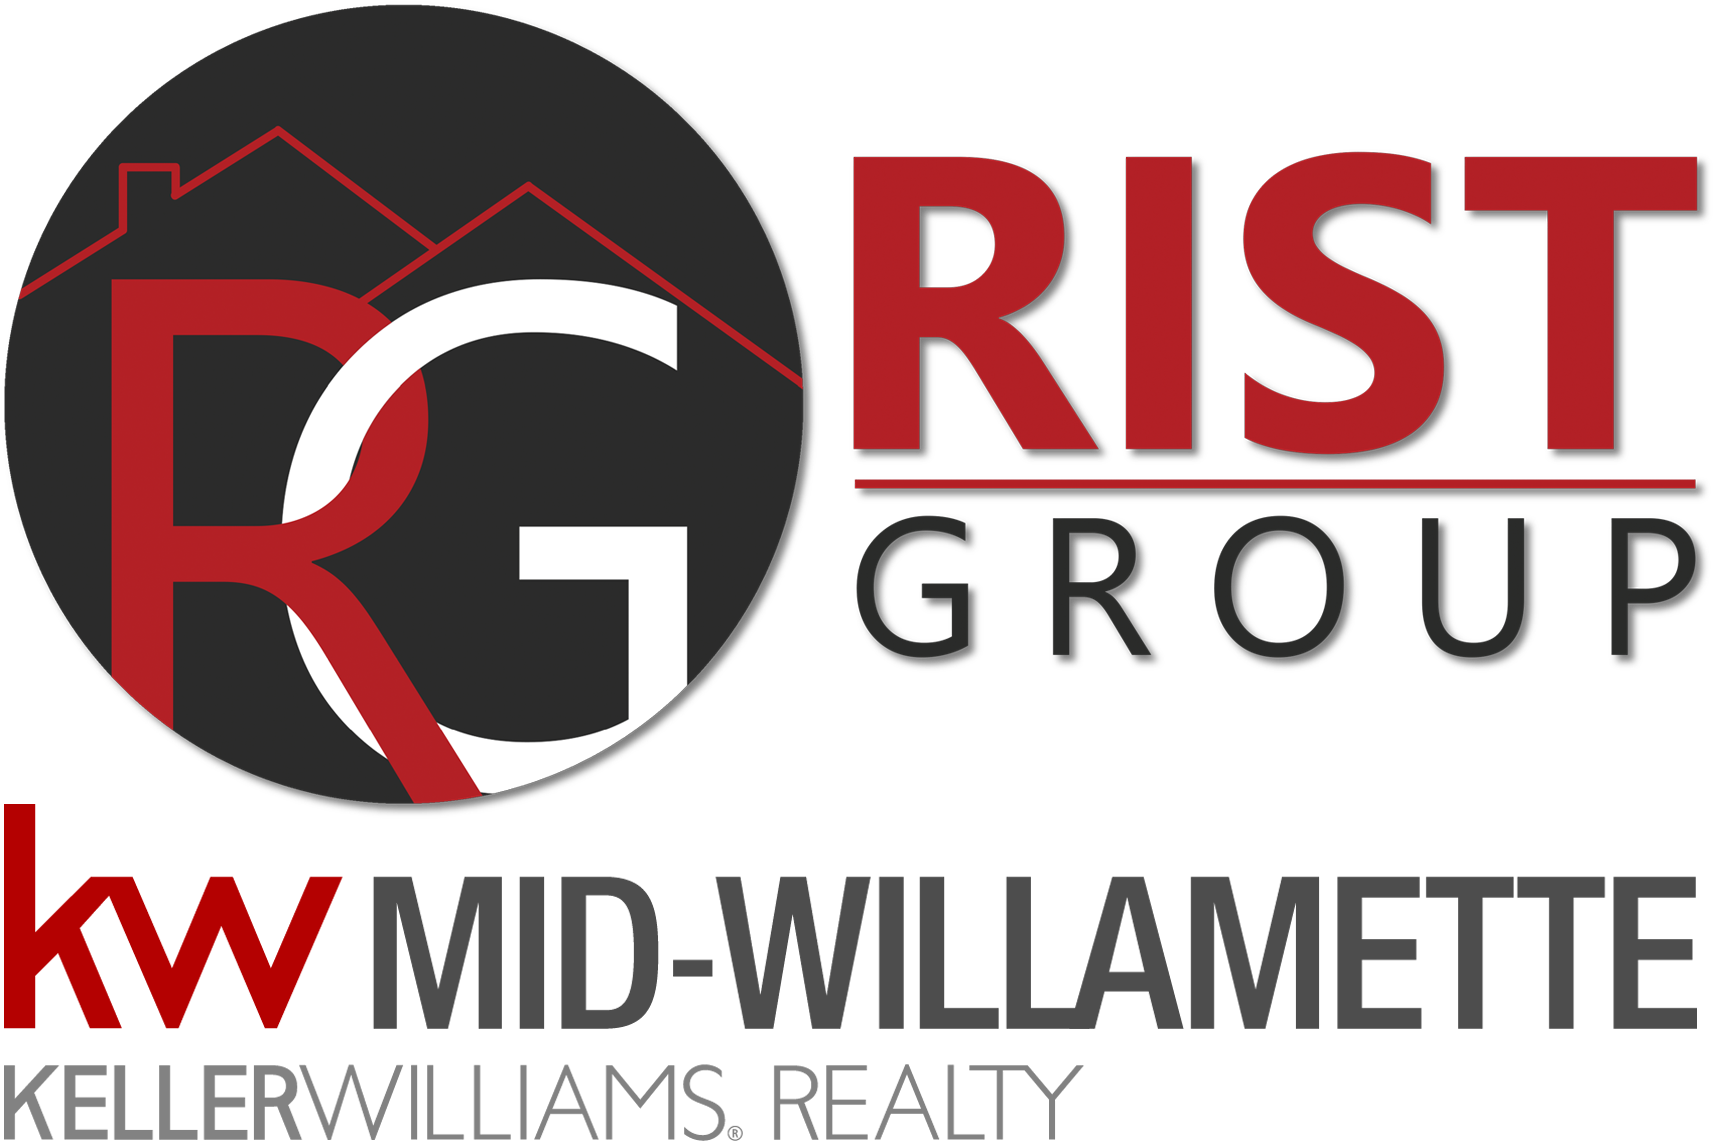 Rist Group Kw Logo - Keller Williams Realty (1824x1247), Png Download